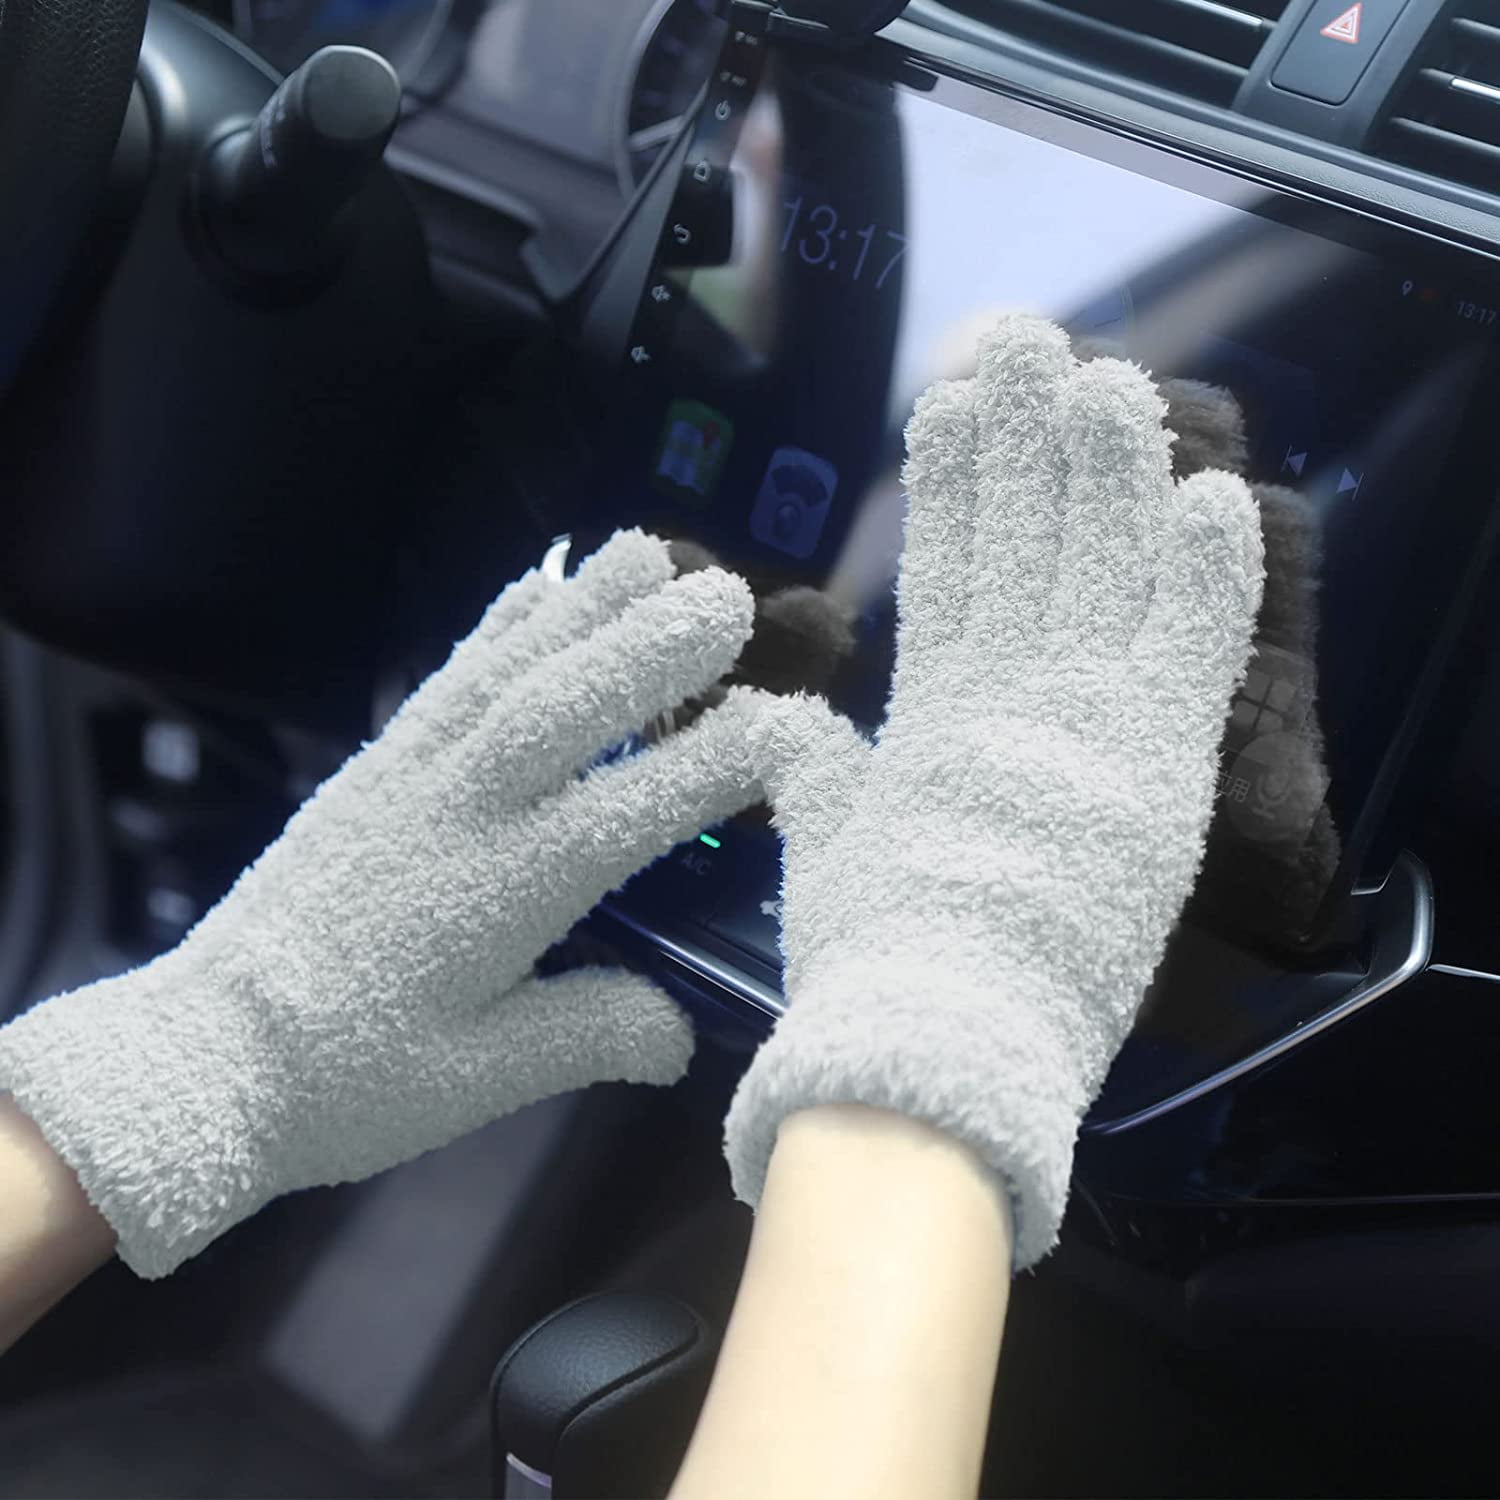 Aster 2 Pairs Microfiber Dusting Gloves Cleaning Gloves Flexible No  Shedding Microfiber Dust Cleaning Glove Wipes, Dust Gloves for Cleaning  Lamp, Car